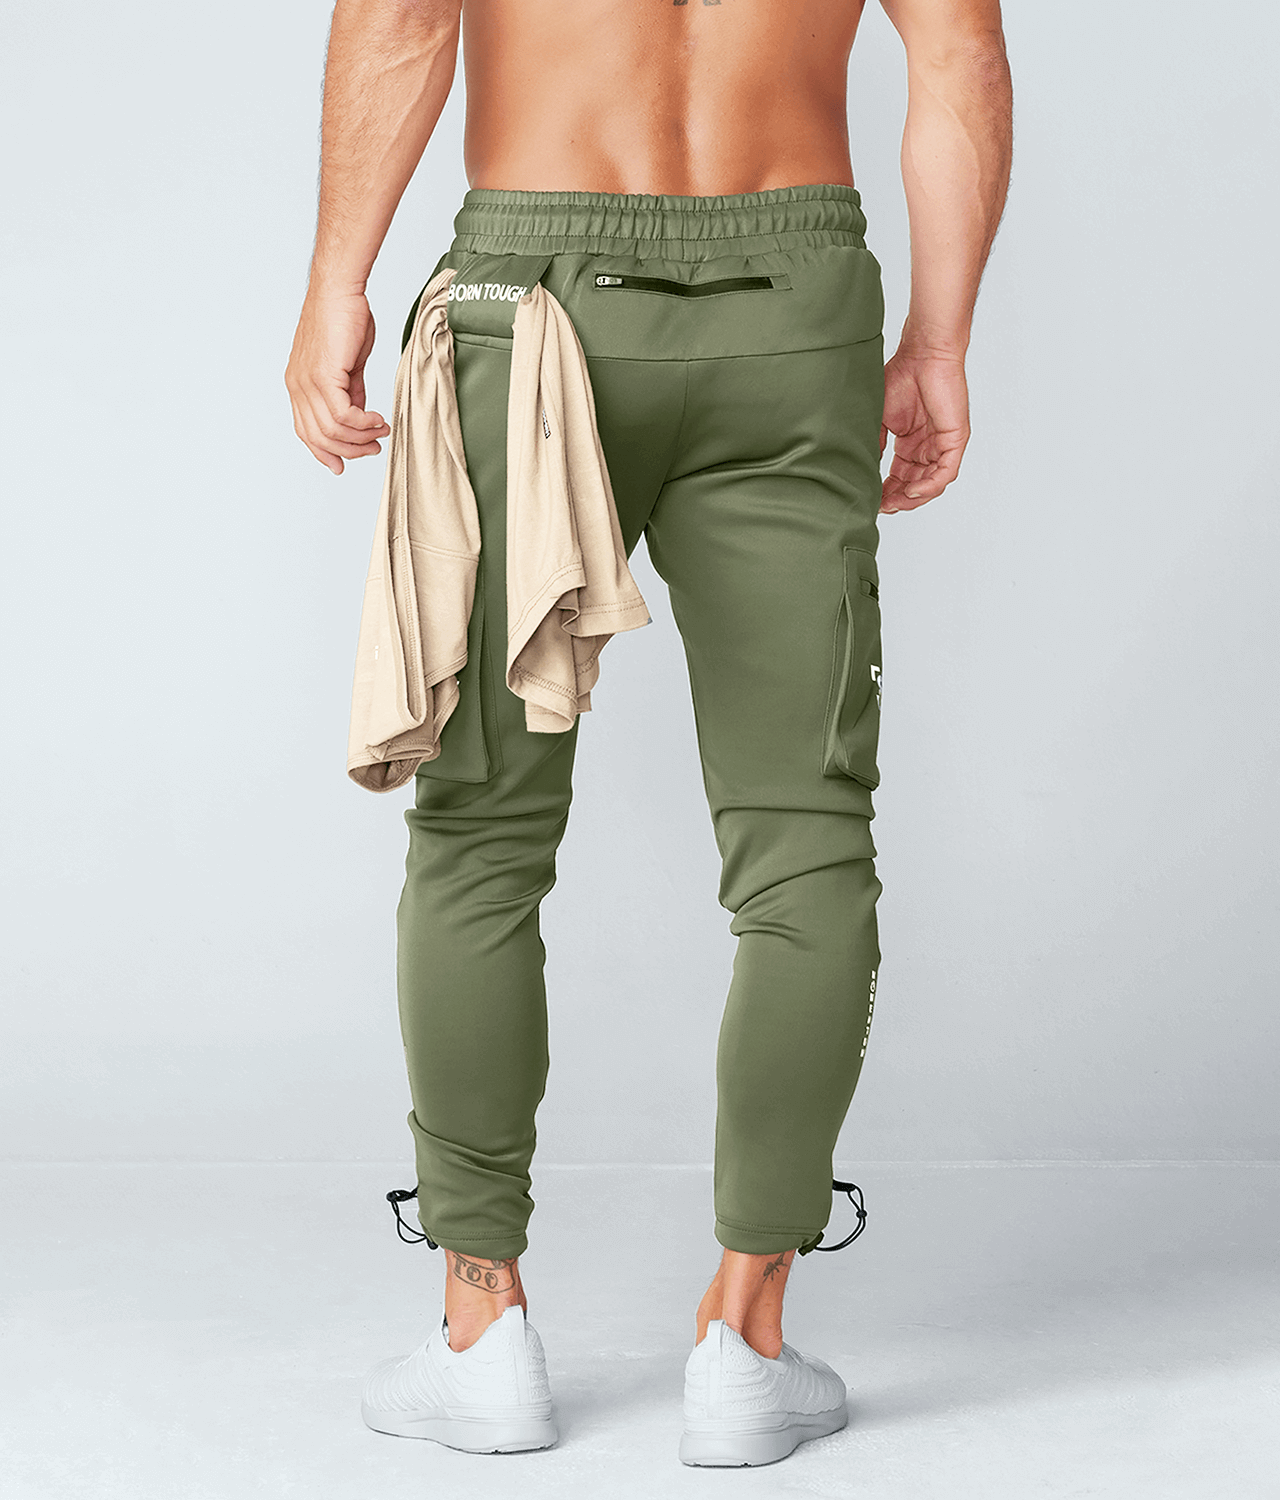 Men's Joggers Cargo Pants with Zipper Pockets Casual Gym Basketball Bottom  Joggers with Belt Loop Brown – PULI